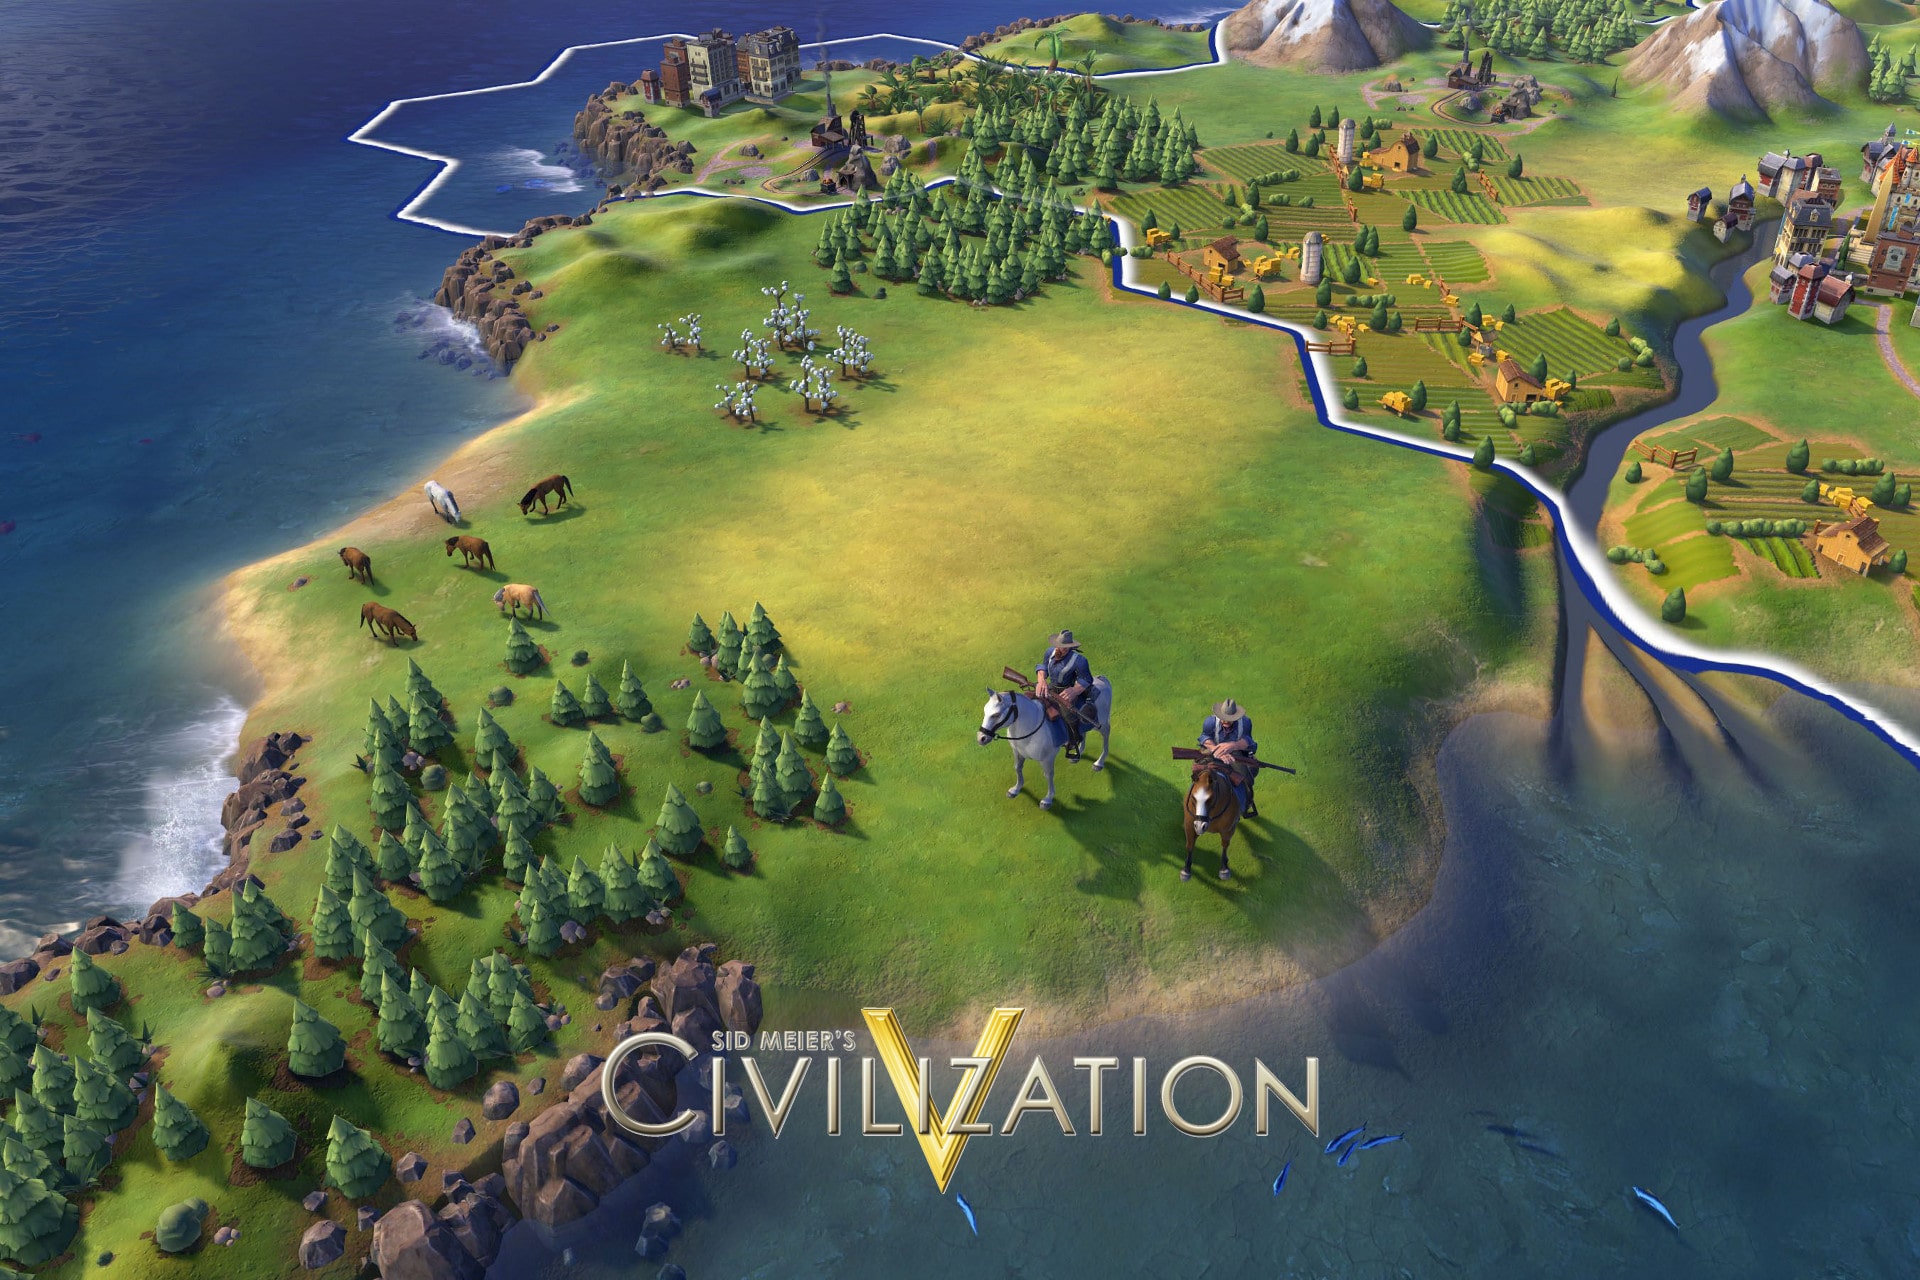 fix Civ 5 multiplayer lag with a VPN